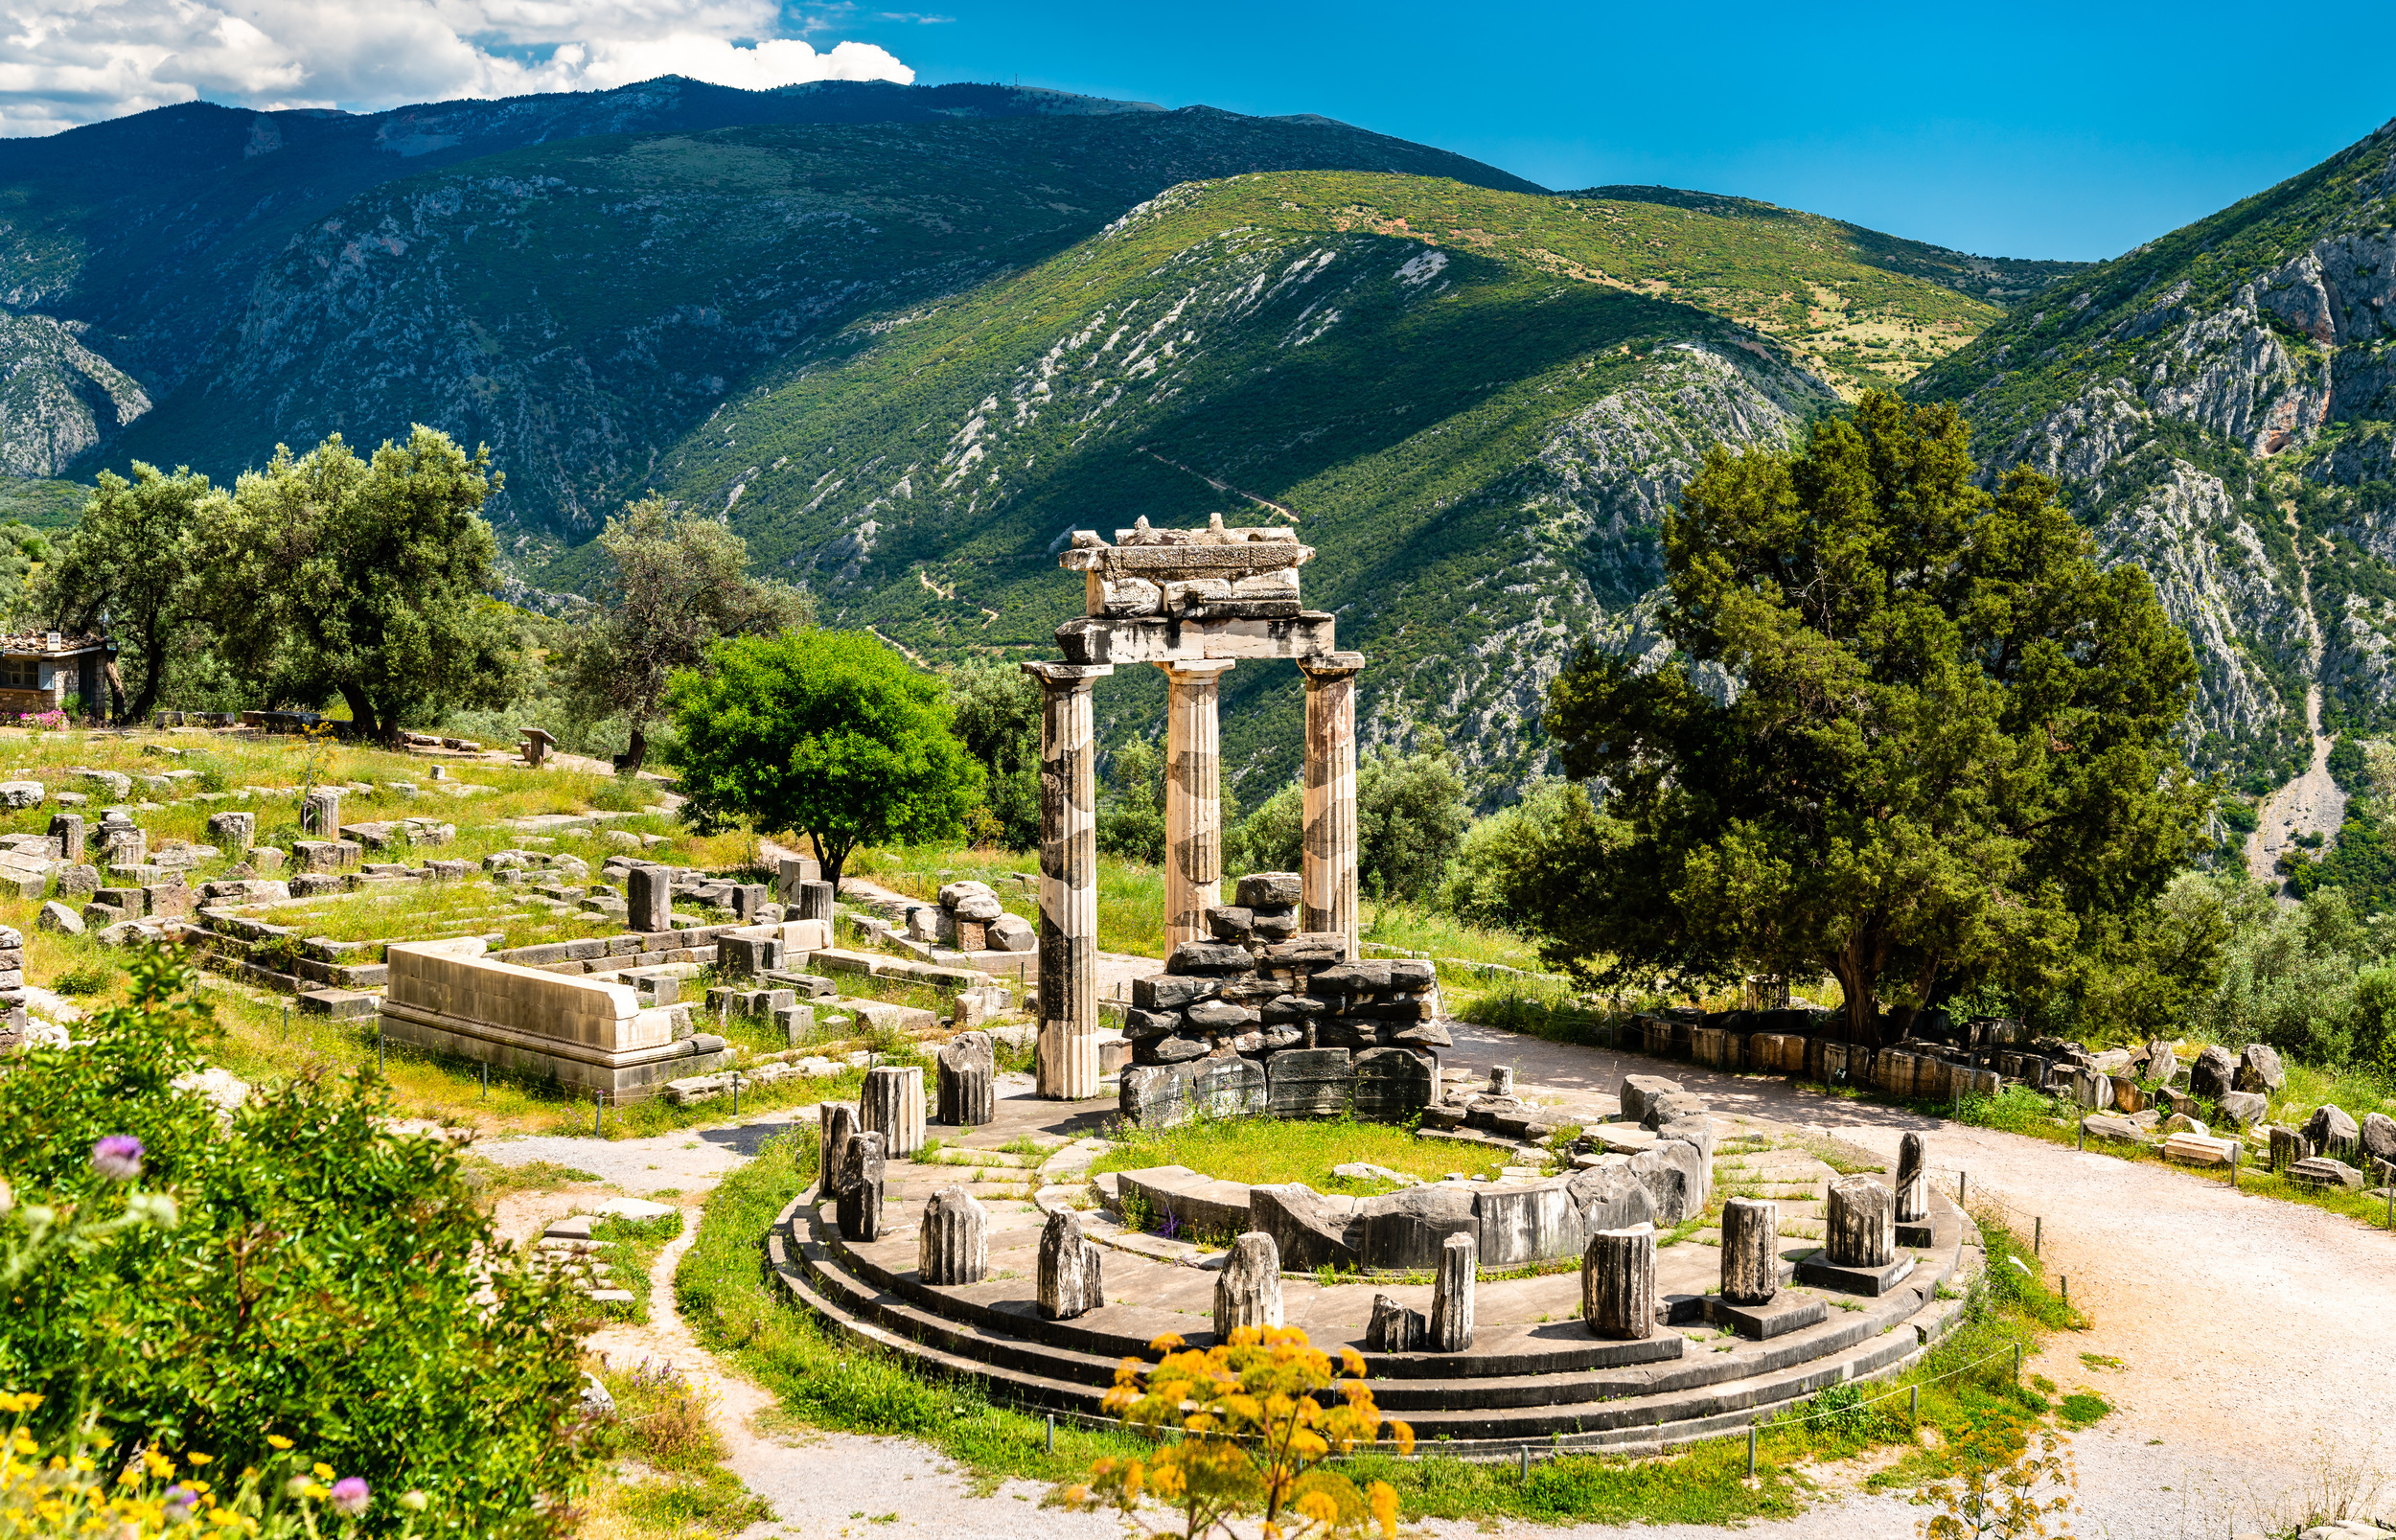 <p>One of the most popular (and easiest) day trips from Athens, Delphi is just a couple of hours by car or bus but feels a world away. The ride will take you through Greek farmland before entering the mountains just before entering the ancient city ruins. Make sure to plan for a full day here, or better yet, stay the night!</p><p>You may also like: <a href='https://www.yardbarker.com/lifestyle/articles/20_stores_that_were_crazy_popular_in_the_90s_and_00s/s1__40313091'>20 stores that were crazy popular in the '90s and '00s</a></p>